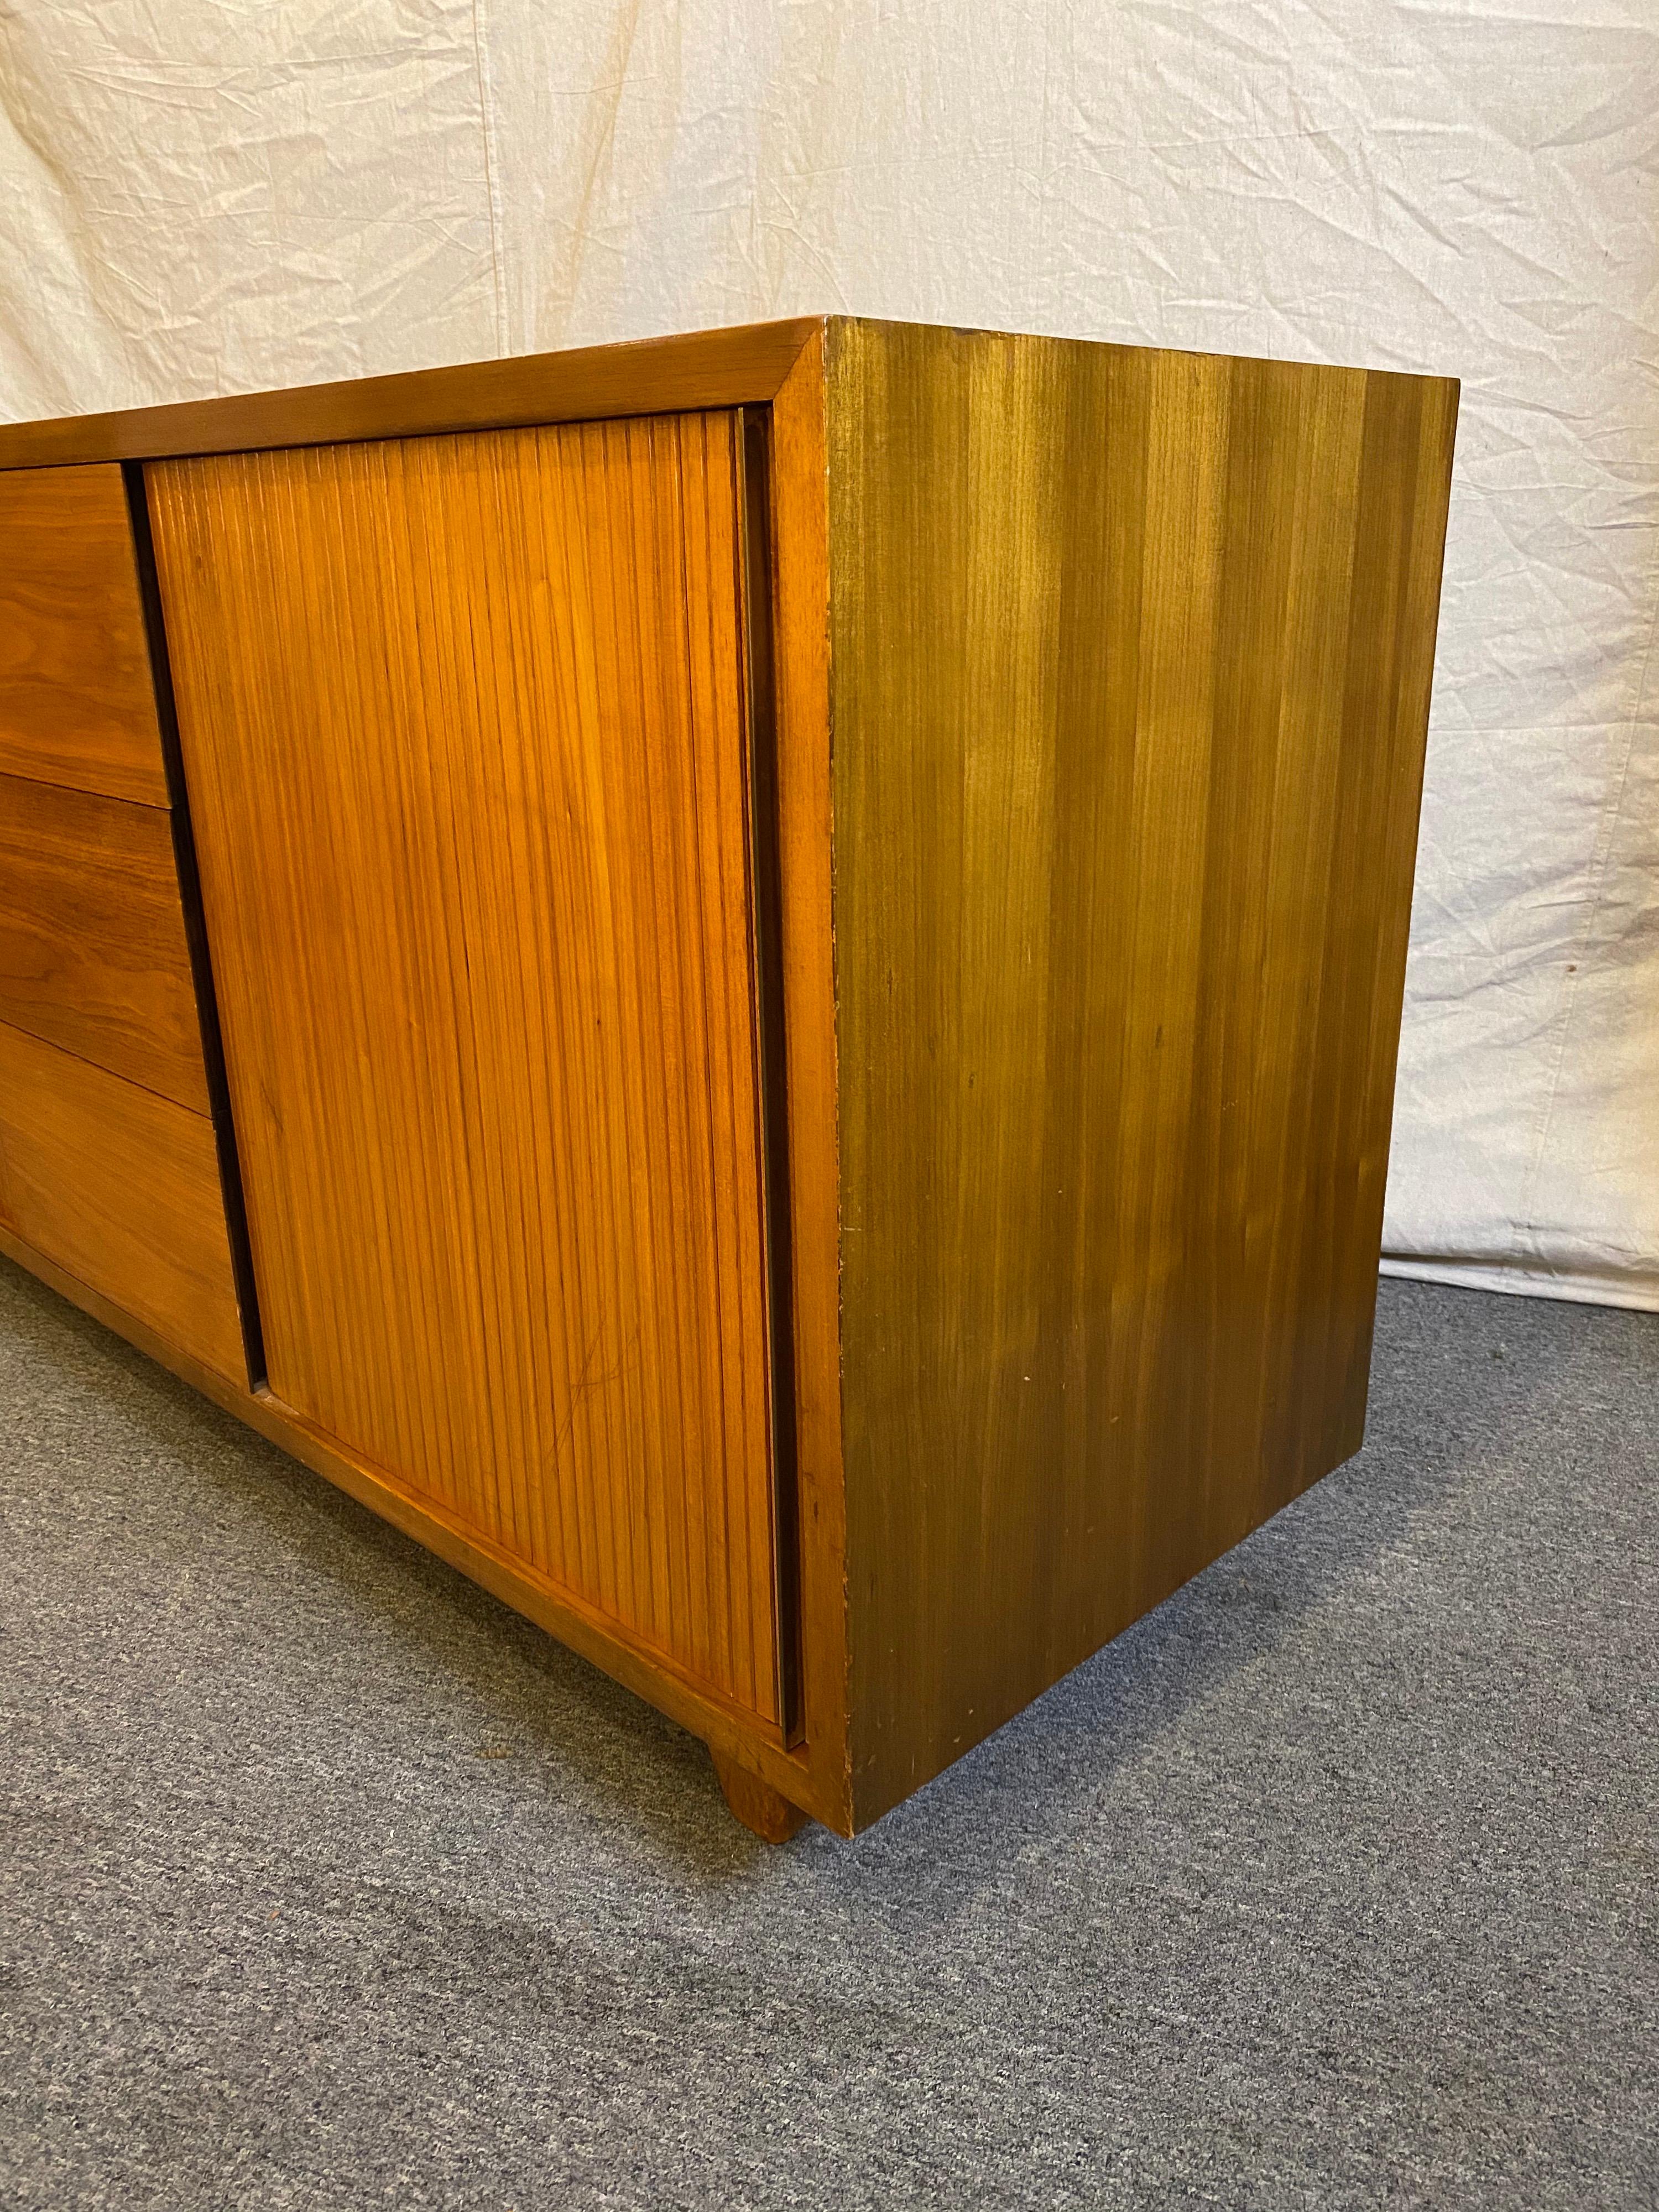 Vladimir Kagan for Kagan/ Dreyfuss walnut credenza or bedroom cabinet. Tambour doors with brass handles at each end slide open to reveal pullout or pull-out drawers. 3 center drawers allow for plenty of storage! Splayed legs support the cabinet.